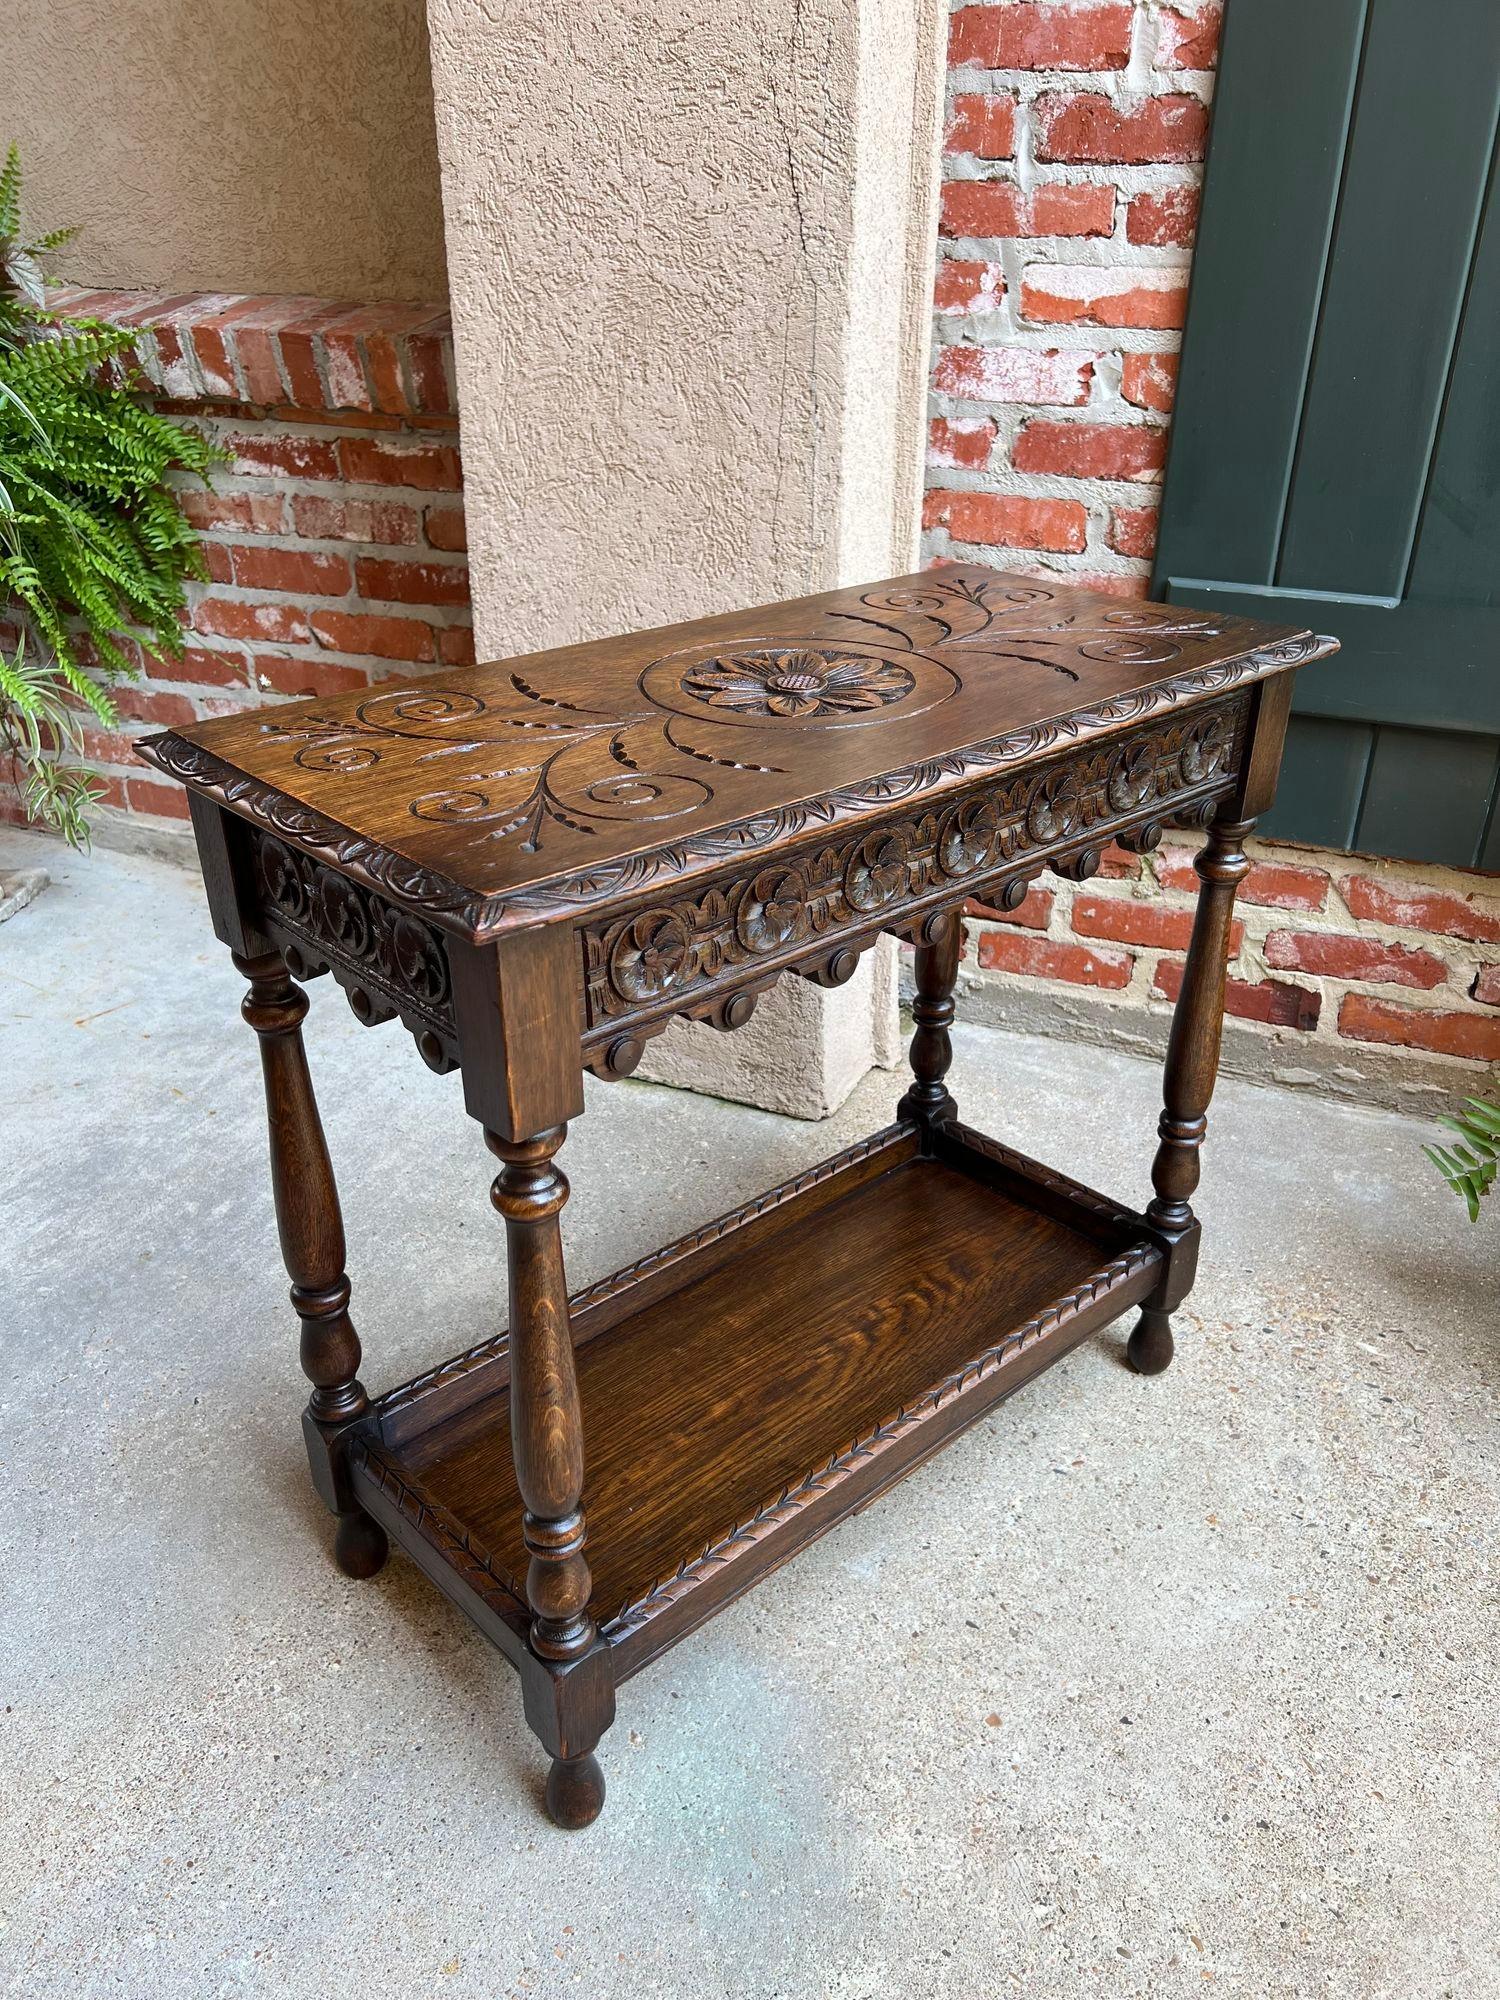 Jacobean Antique English Hall Sofa Table Petite Carved Oak Library Arts and Crafts style